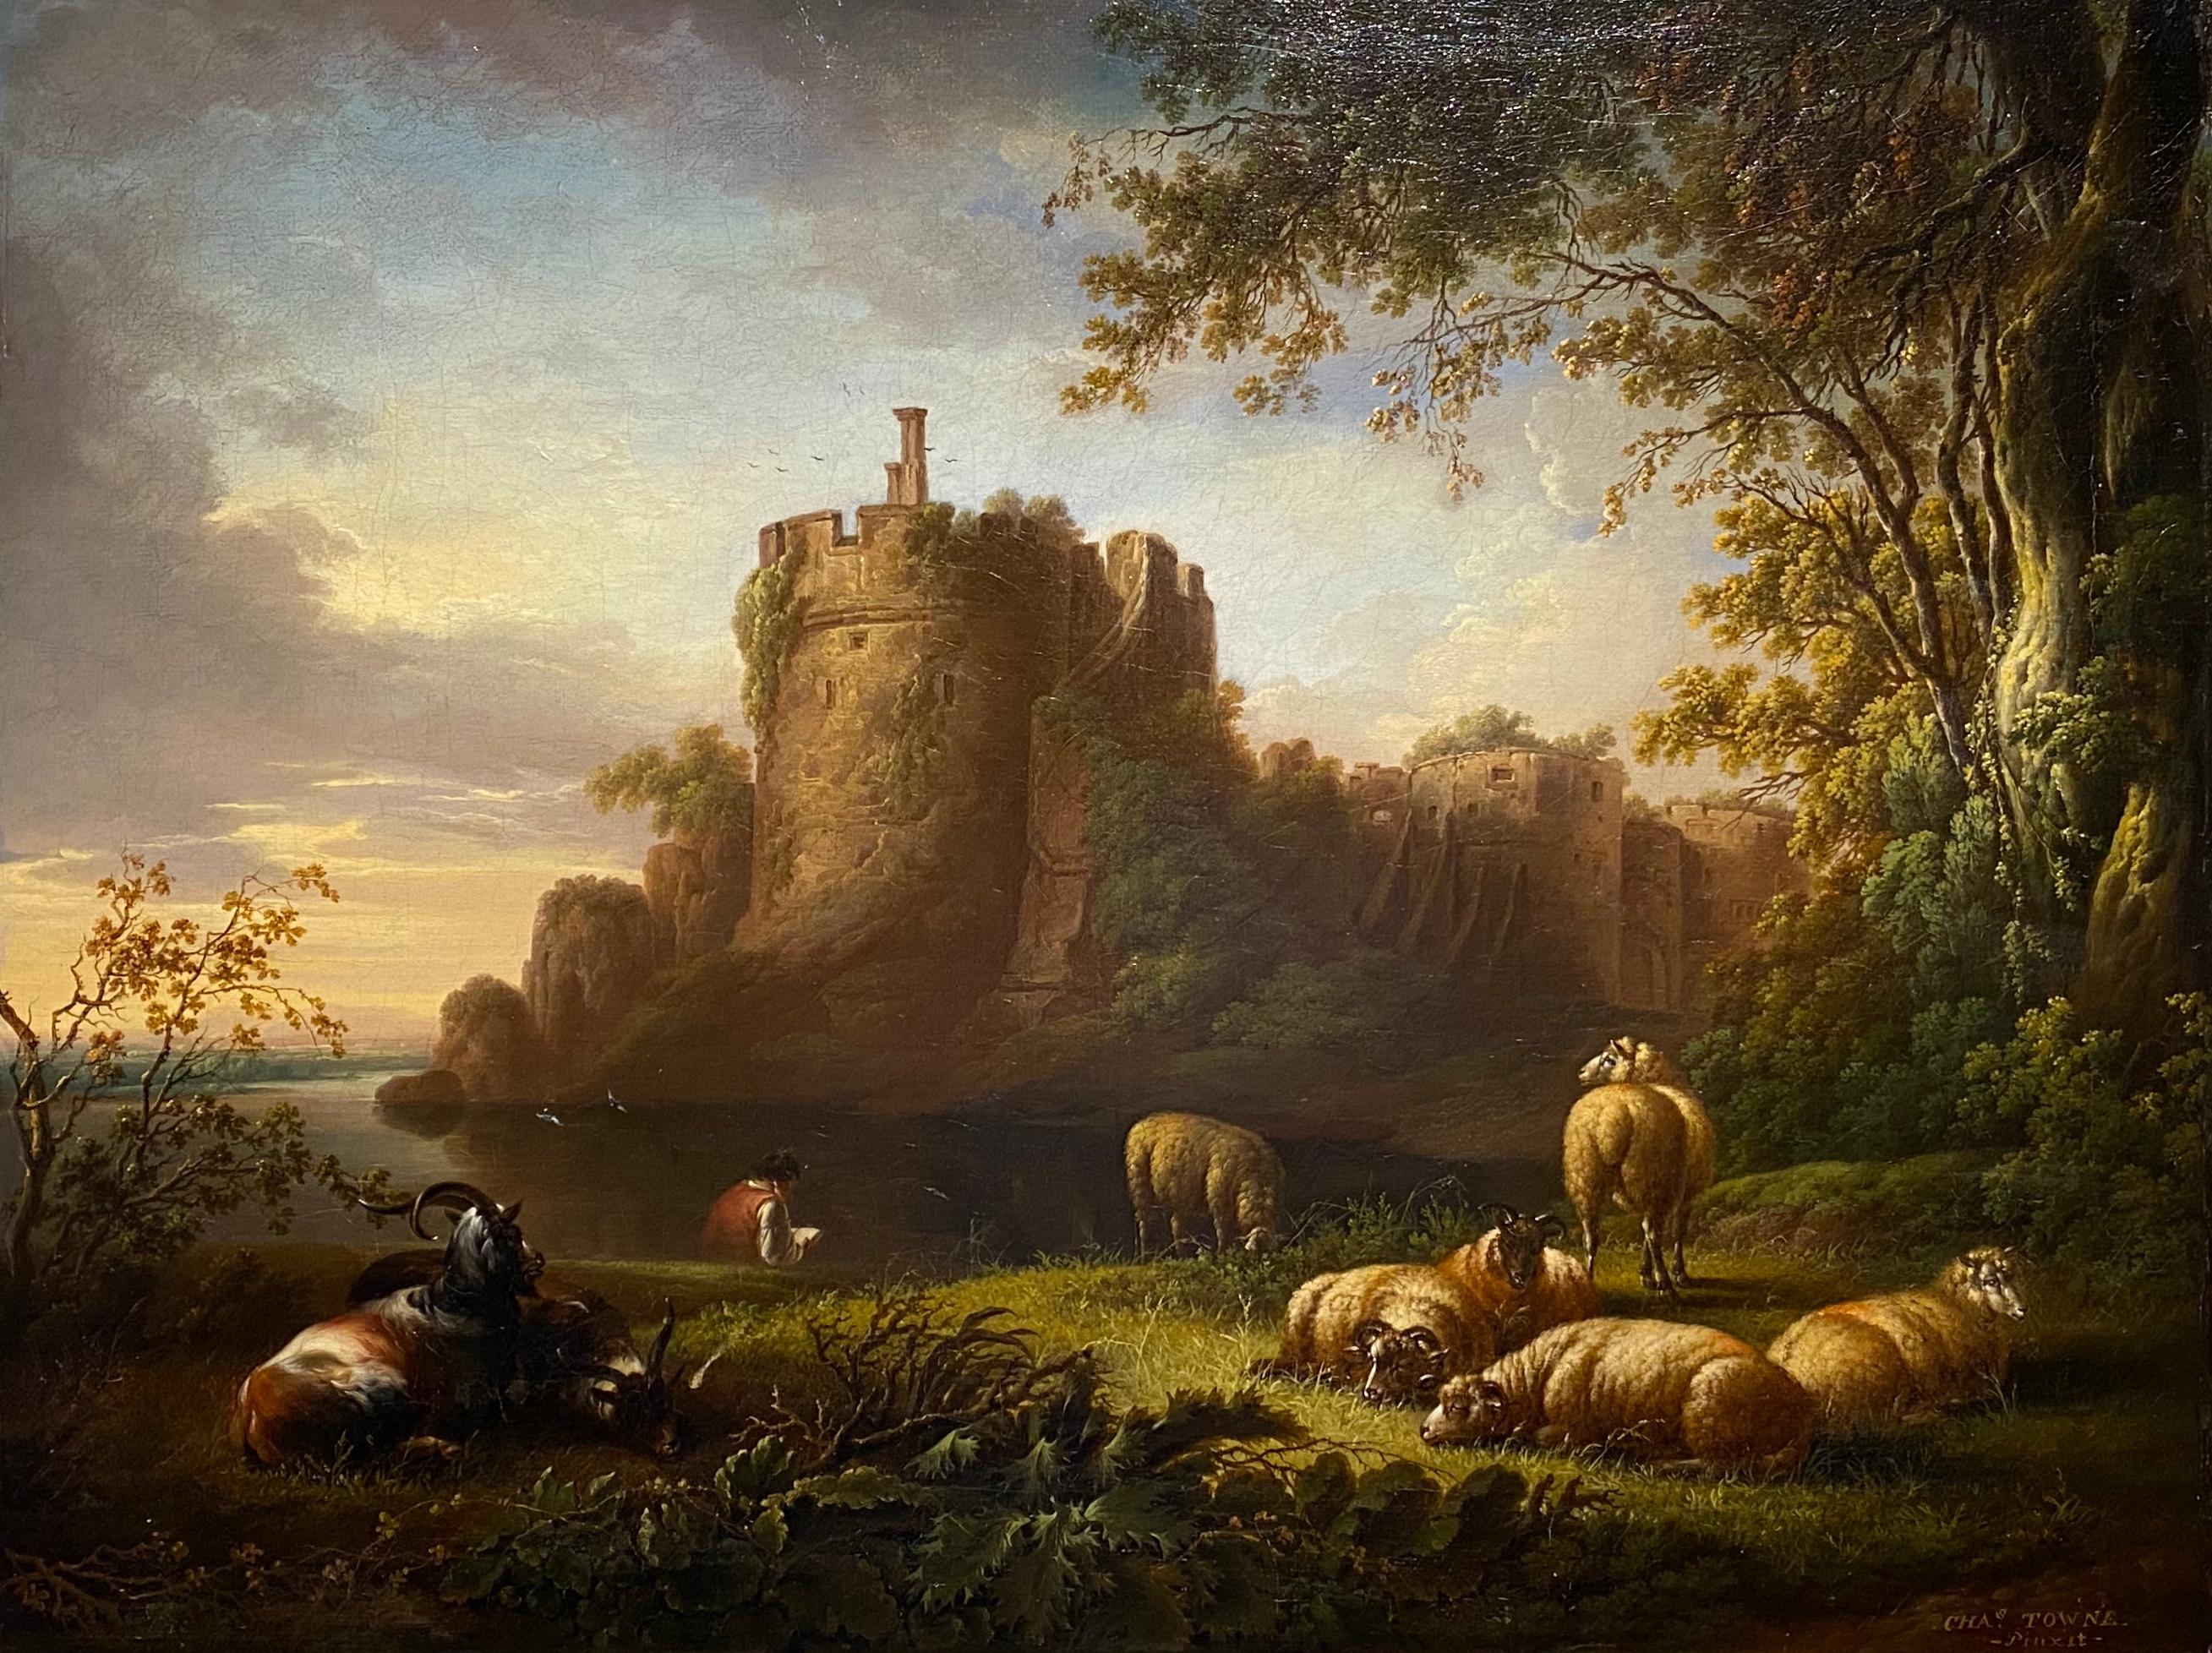 Charles Towne Landscape Painting - A young poet seated in a landscape before ruins, with sheep and goats resting